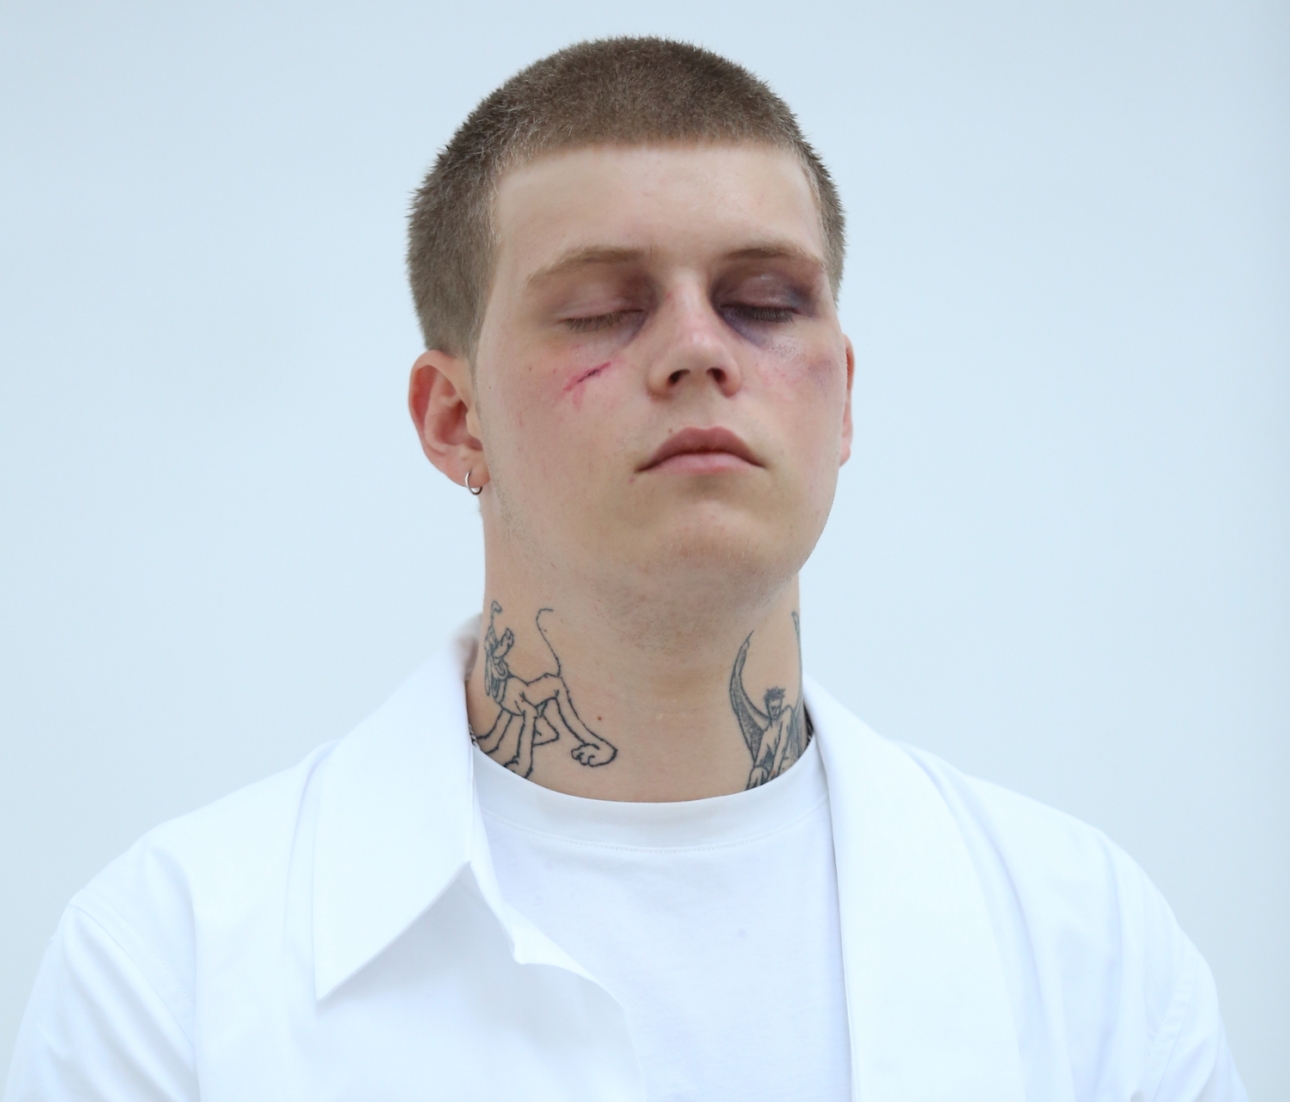 Yung Lean shares two new tracks "Crash Bandicoot" and "Ghost...